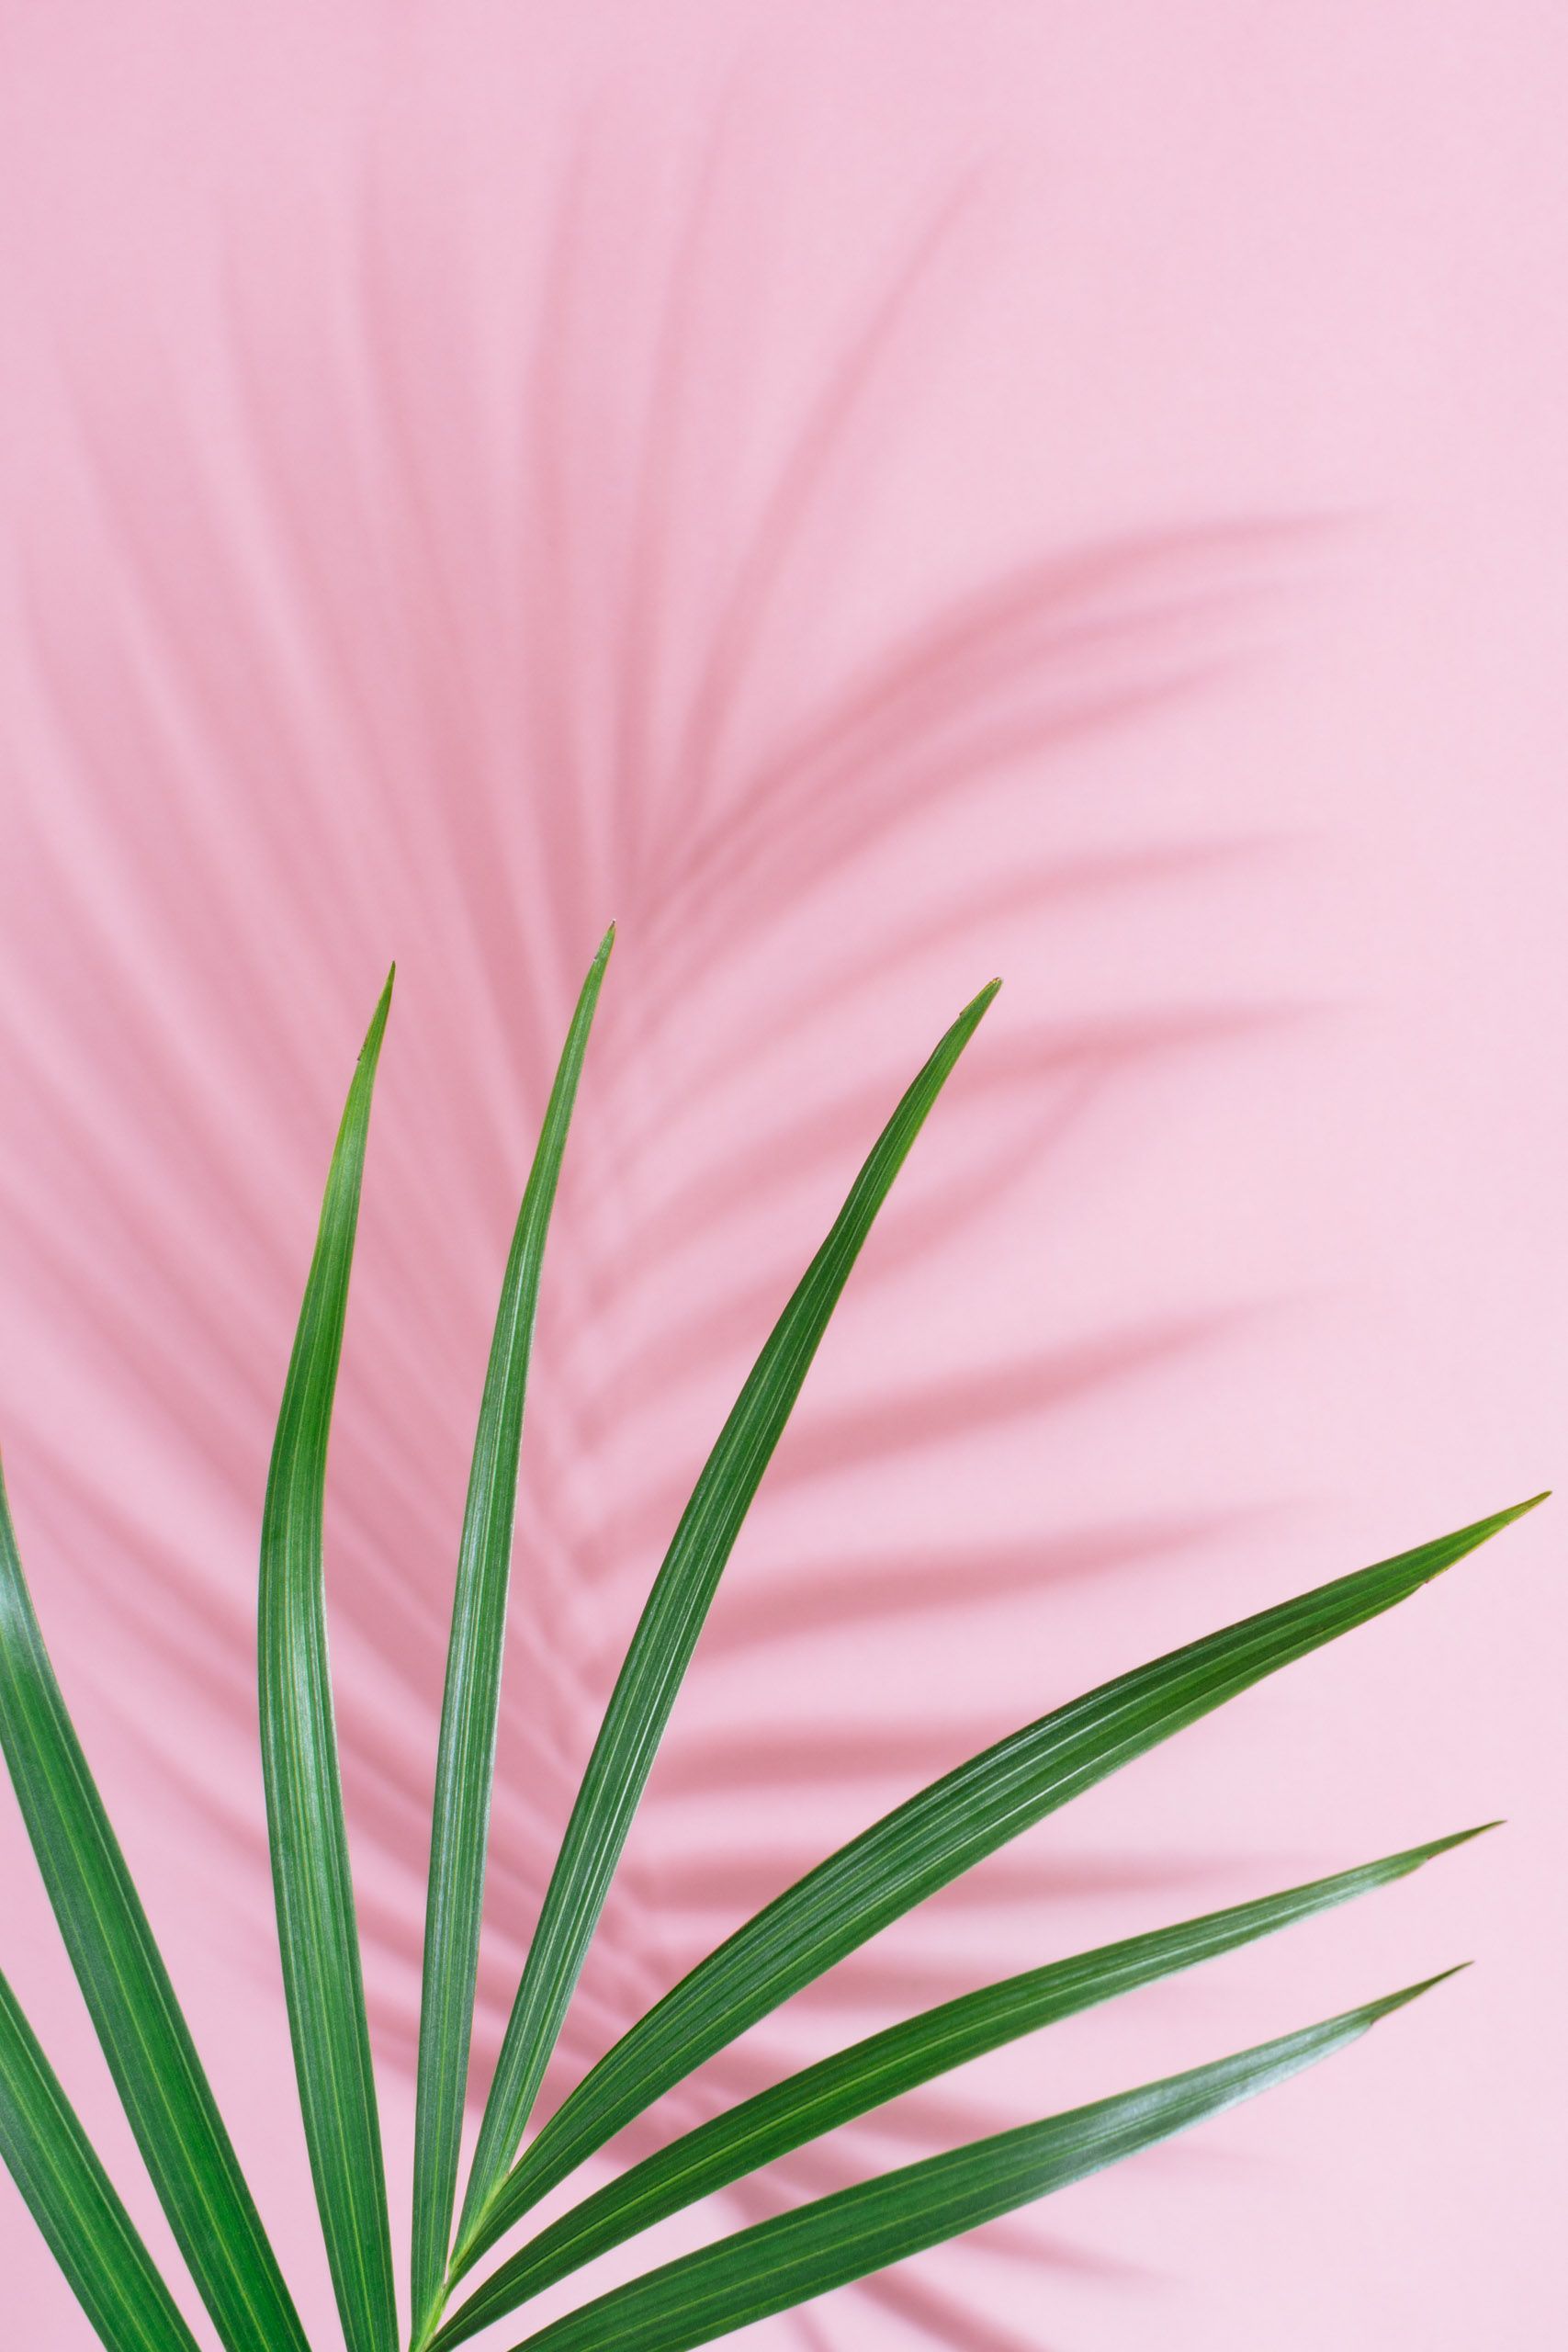 Palm frond  on pink background